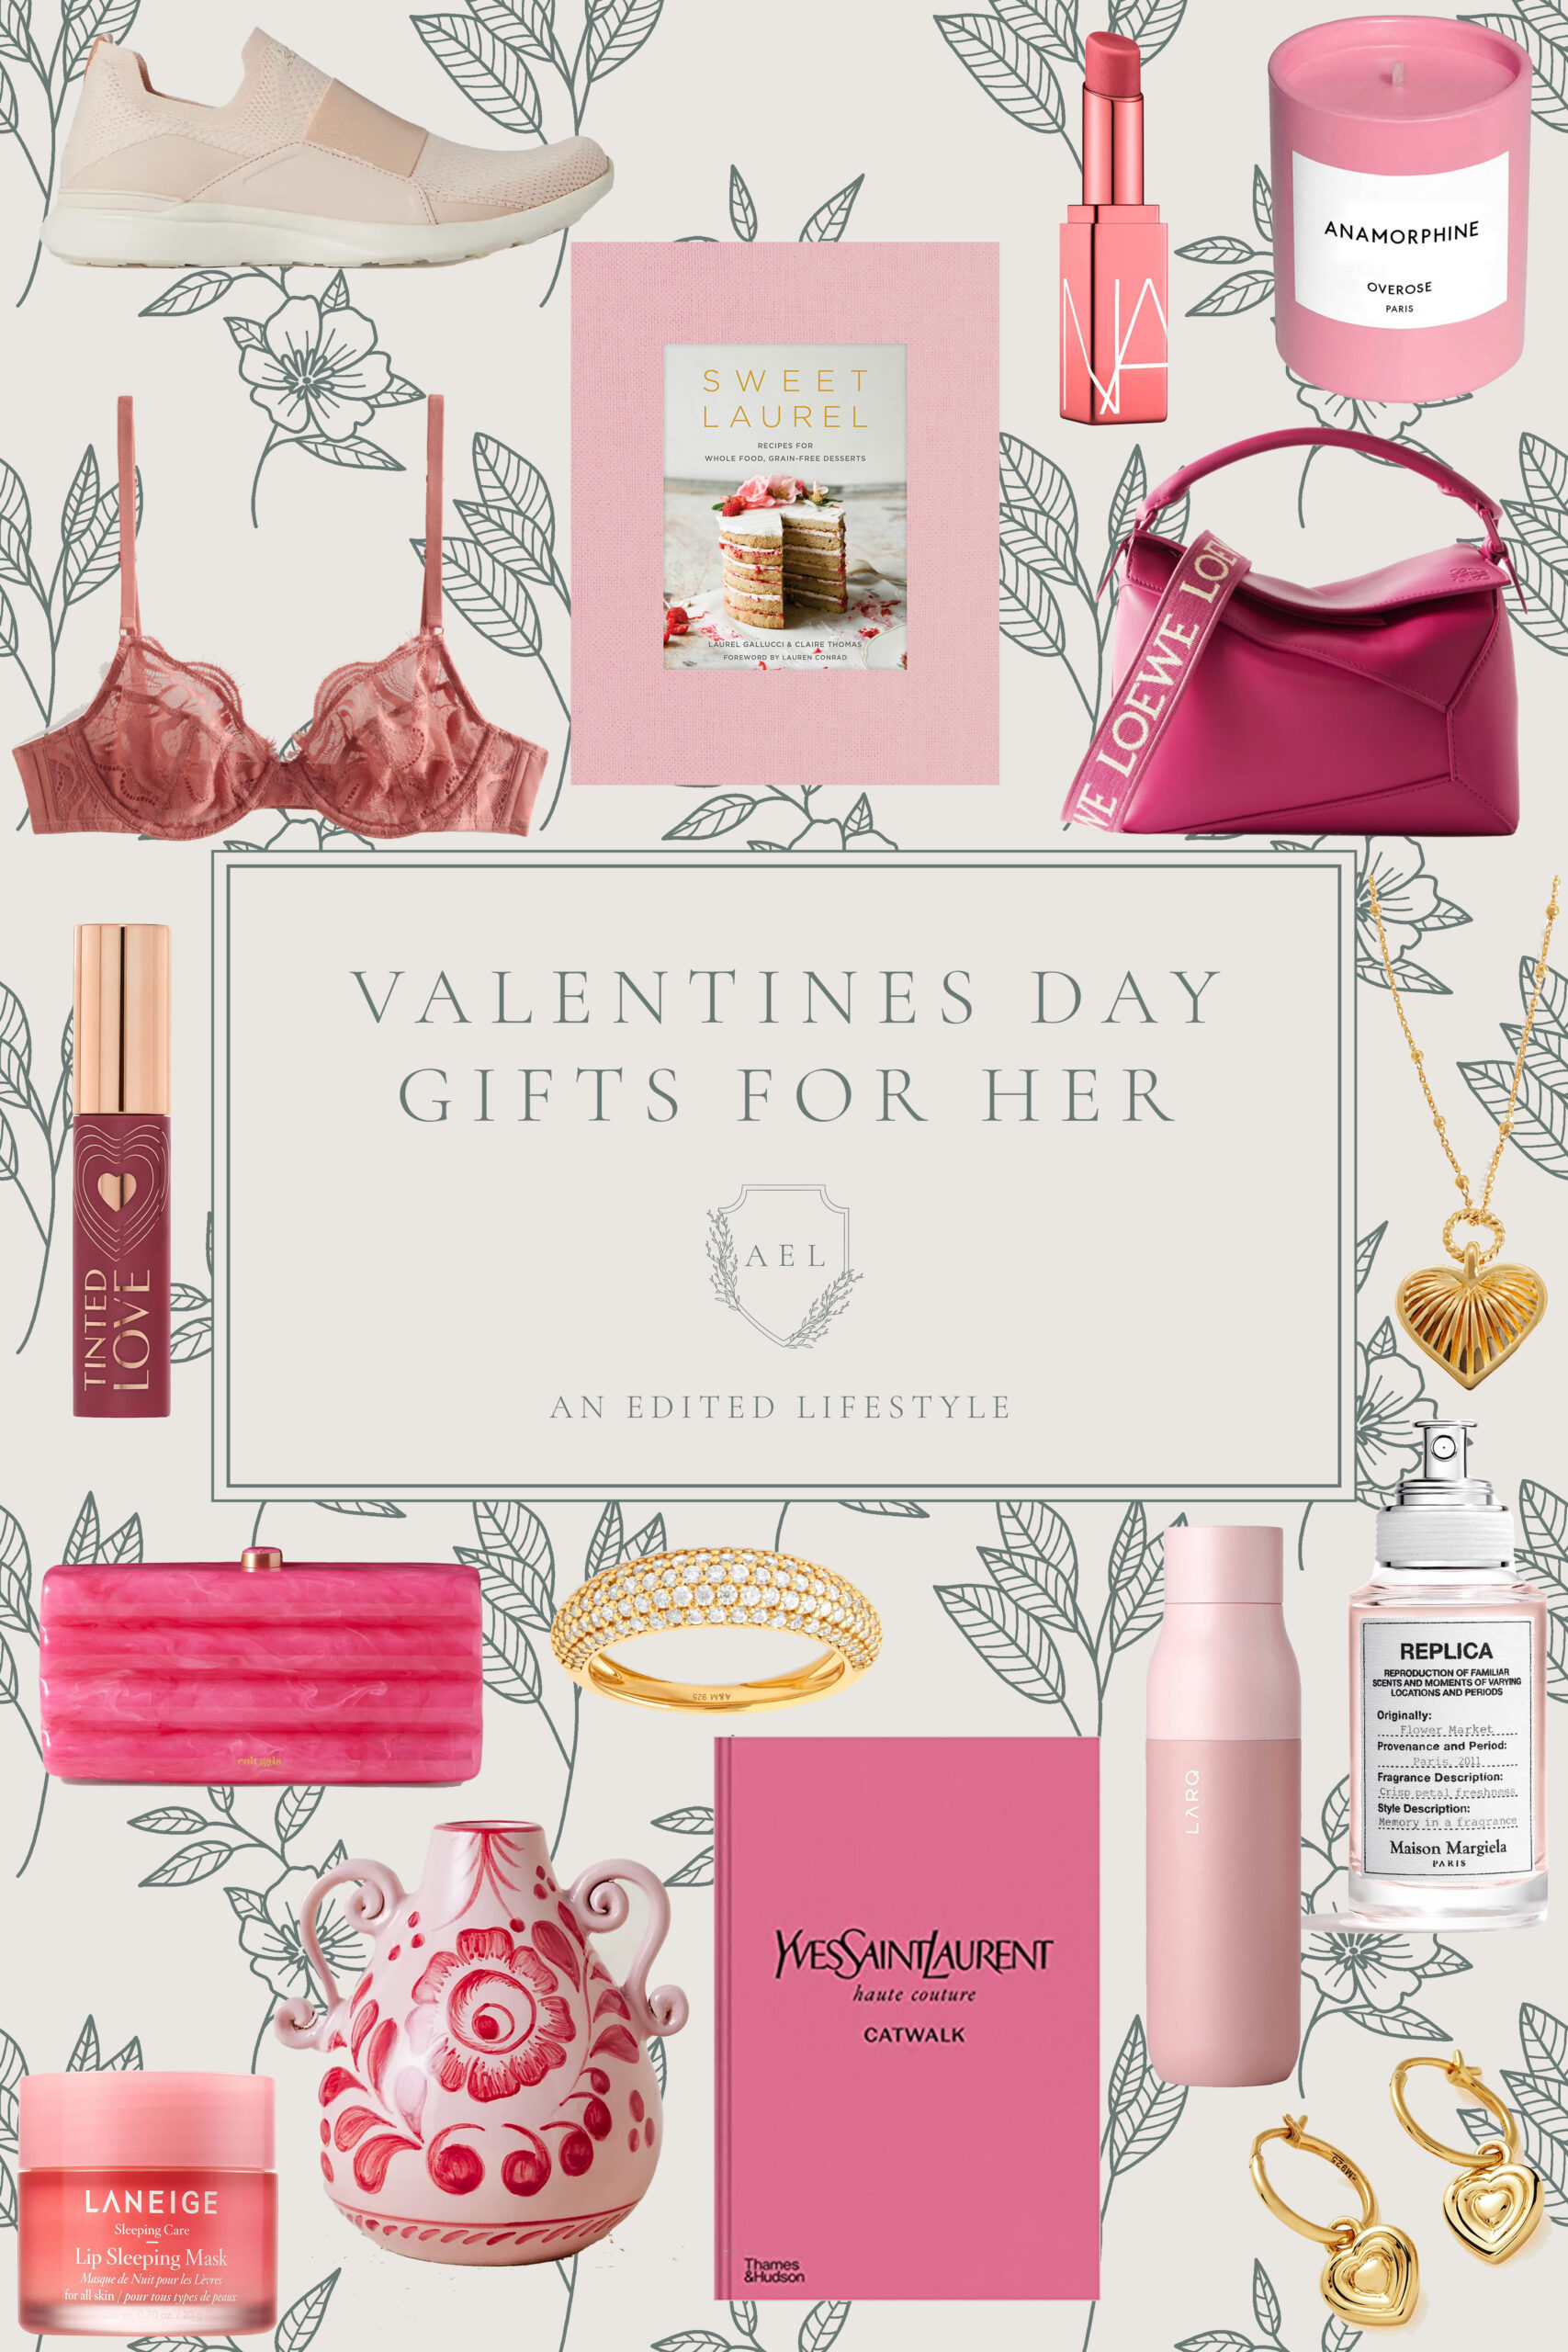 Valentines Day Gifts for Her - An Edited Lifestyle